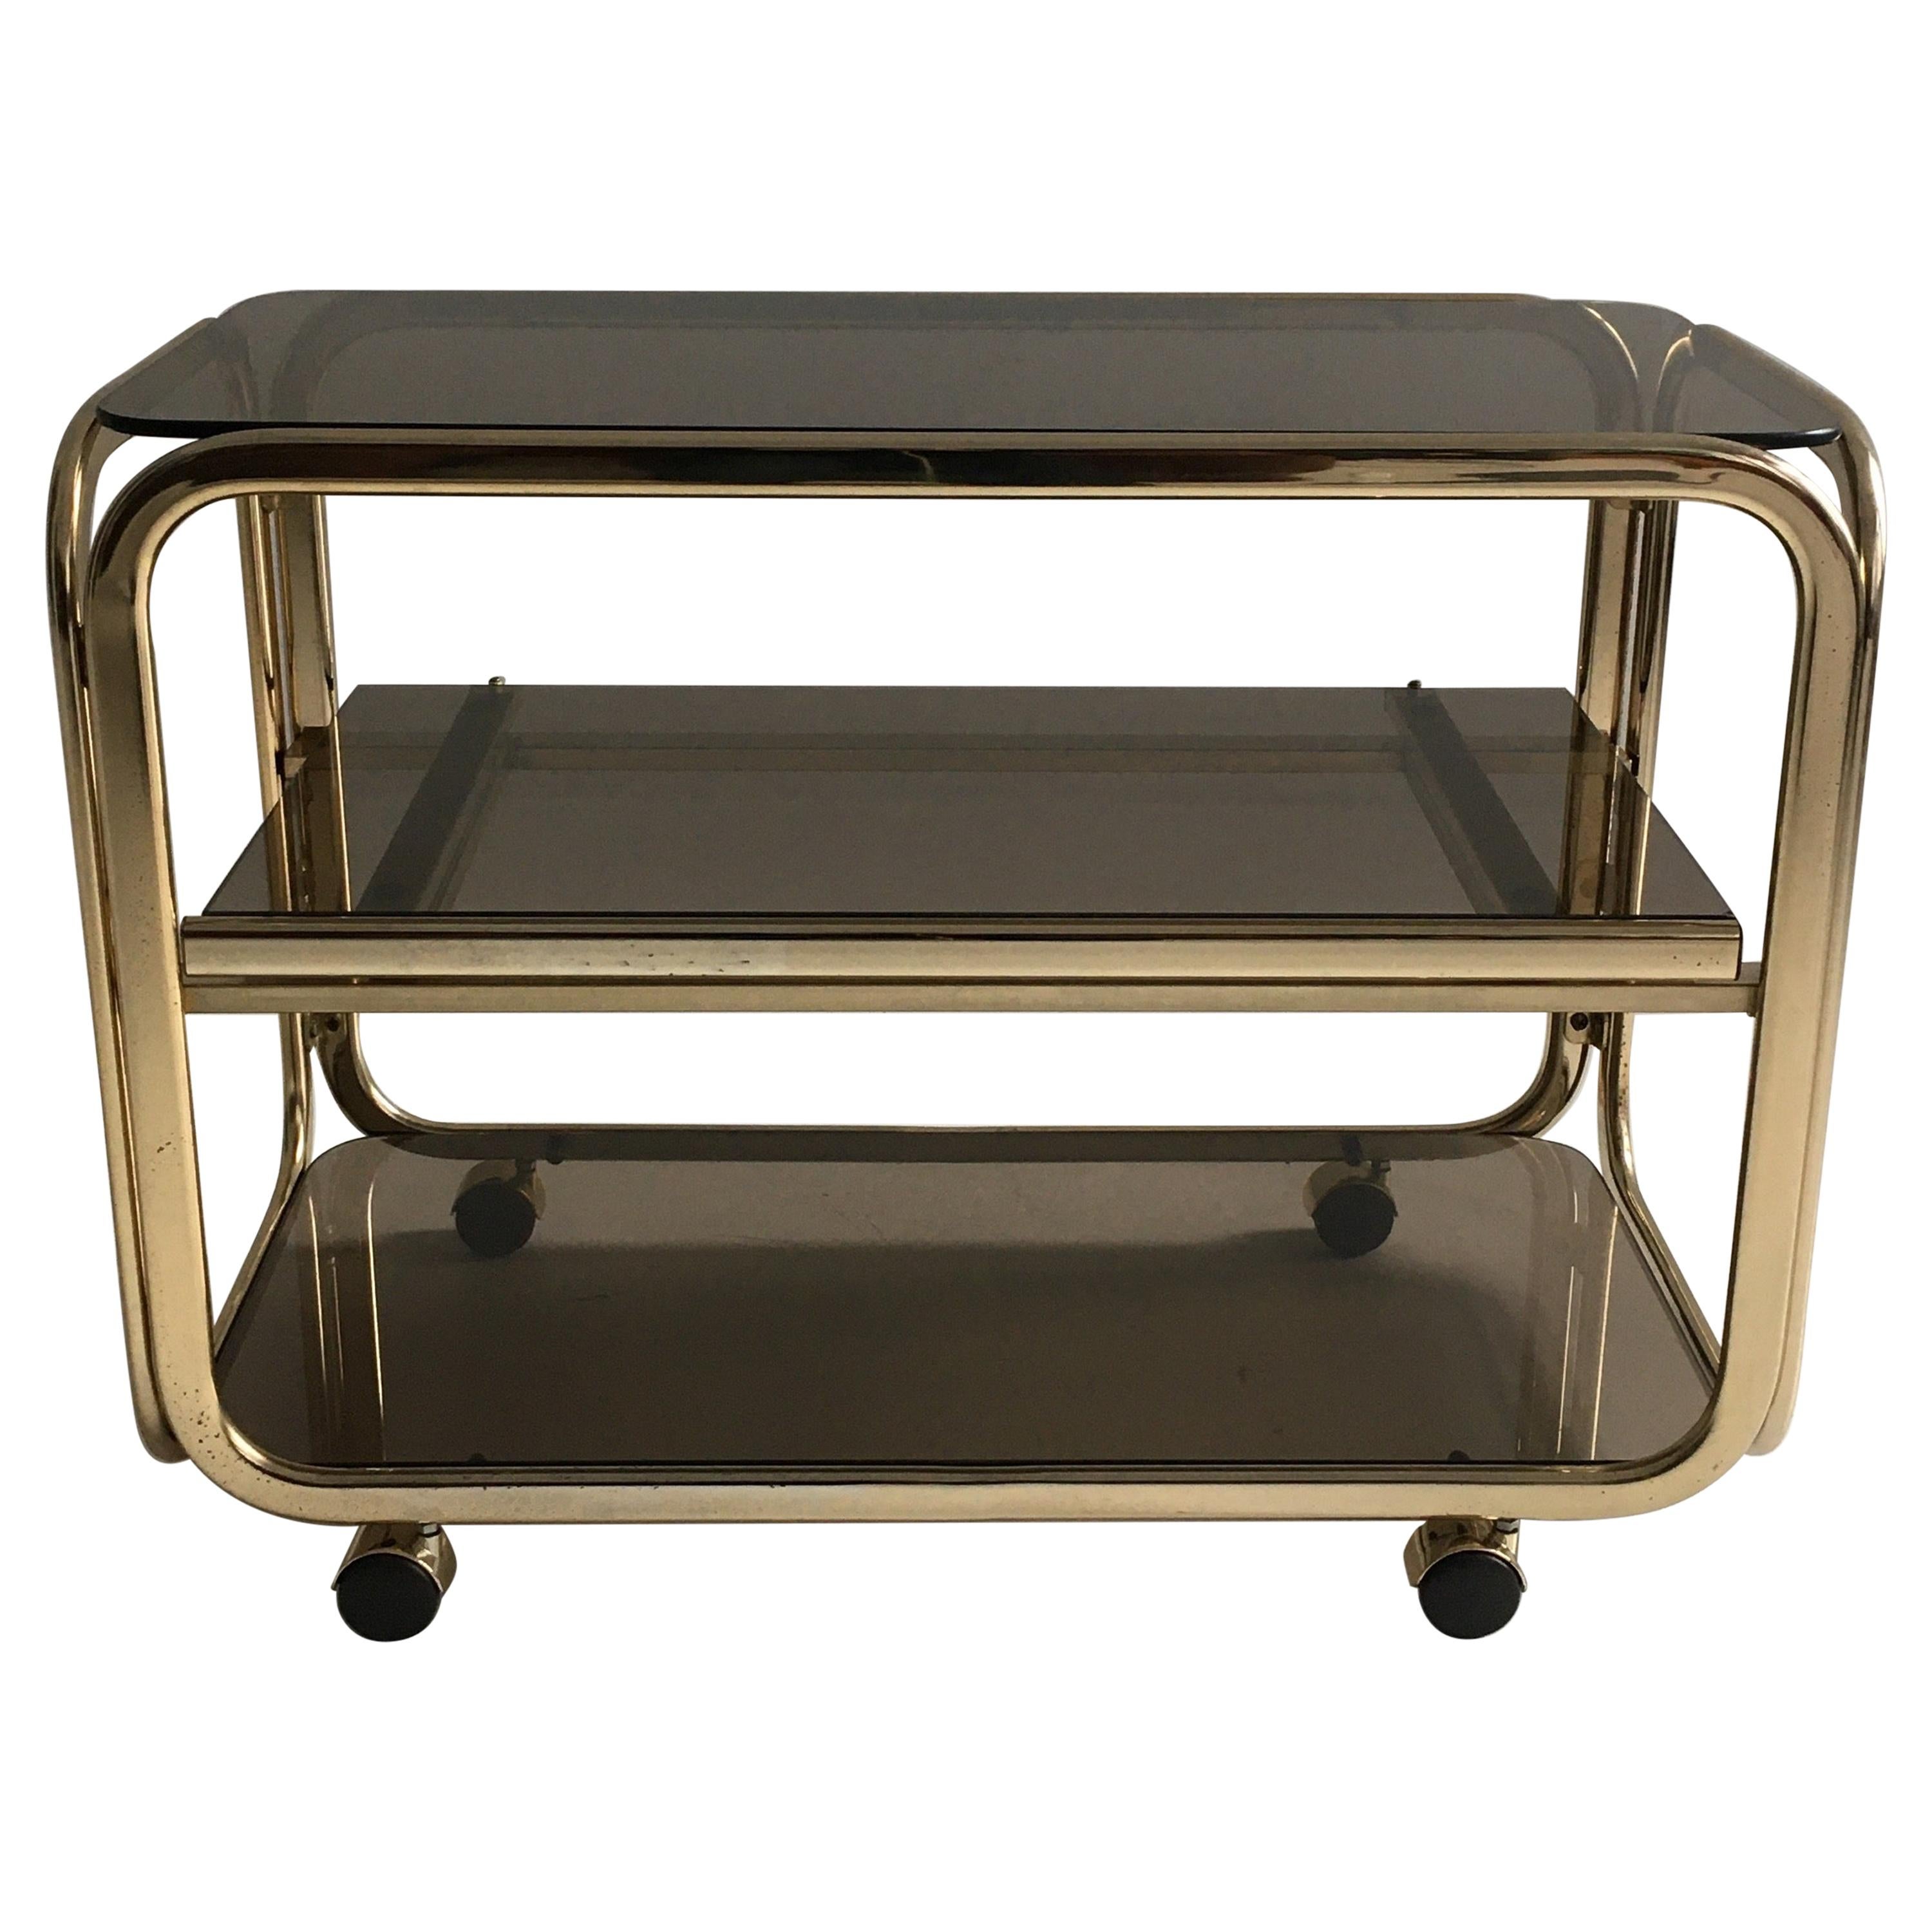 Vintage Brass-Plated Bar Cart Table Brown Smoked Glass Plates by Morex, 1970s